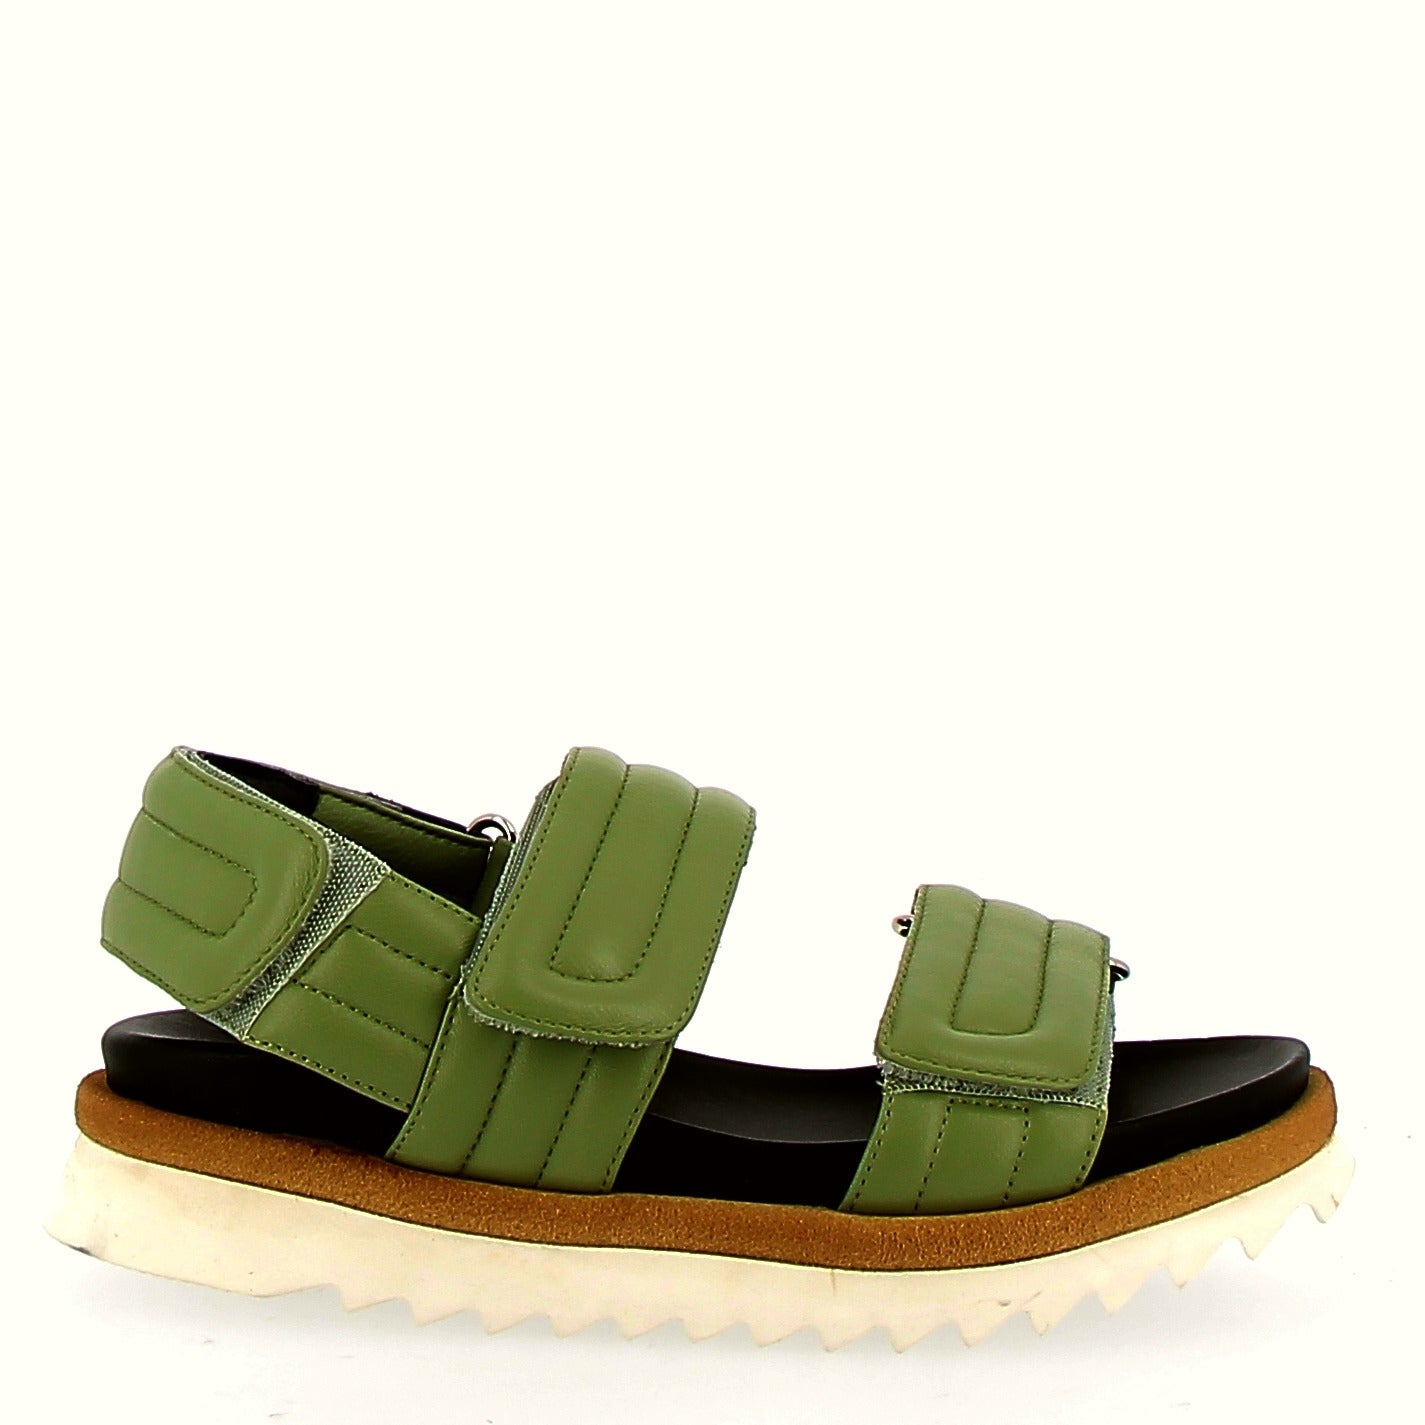 Olive green sandal with strap and fussbett insole